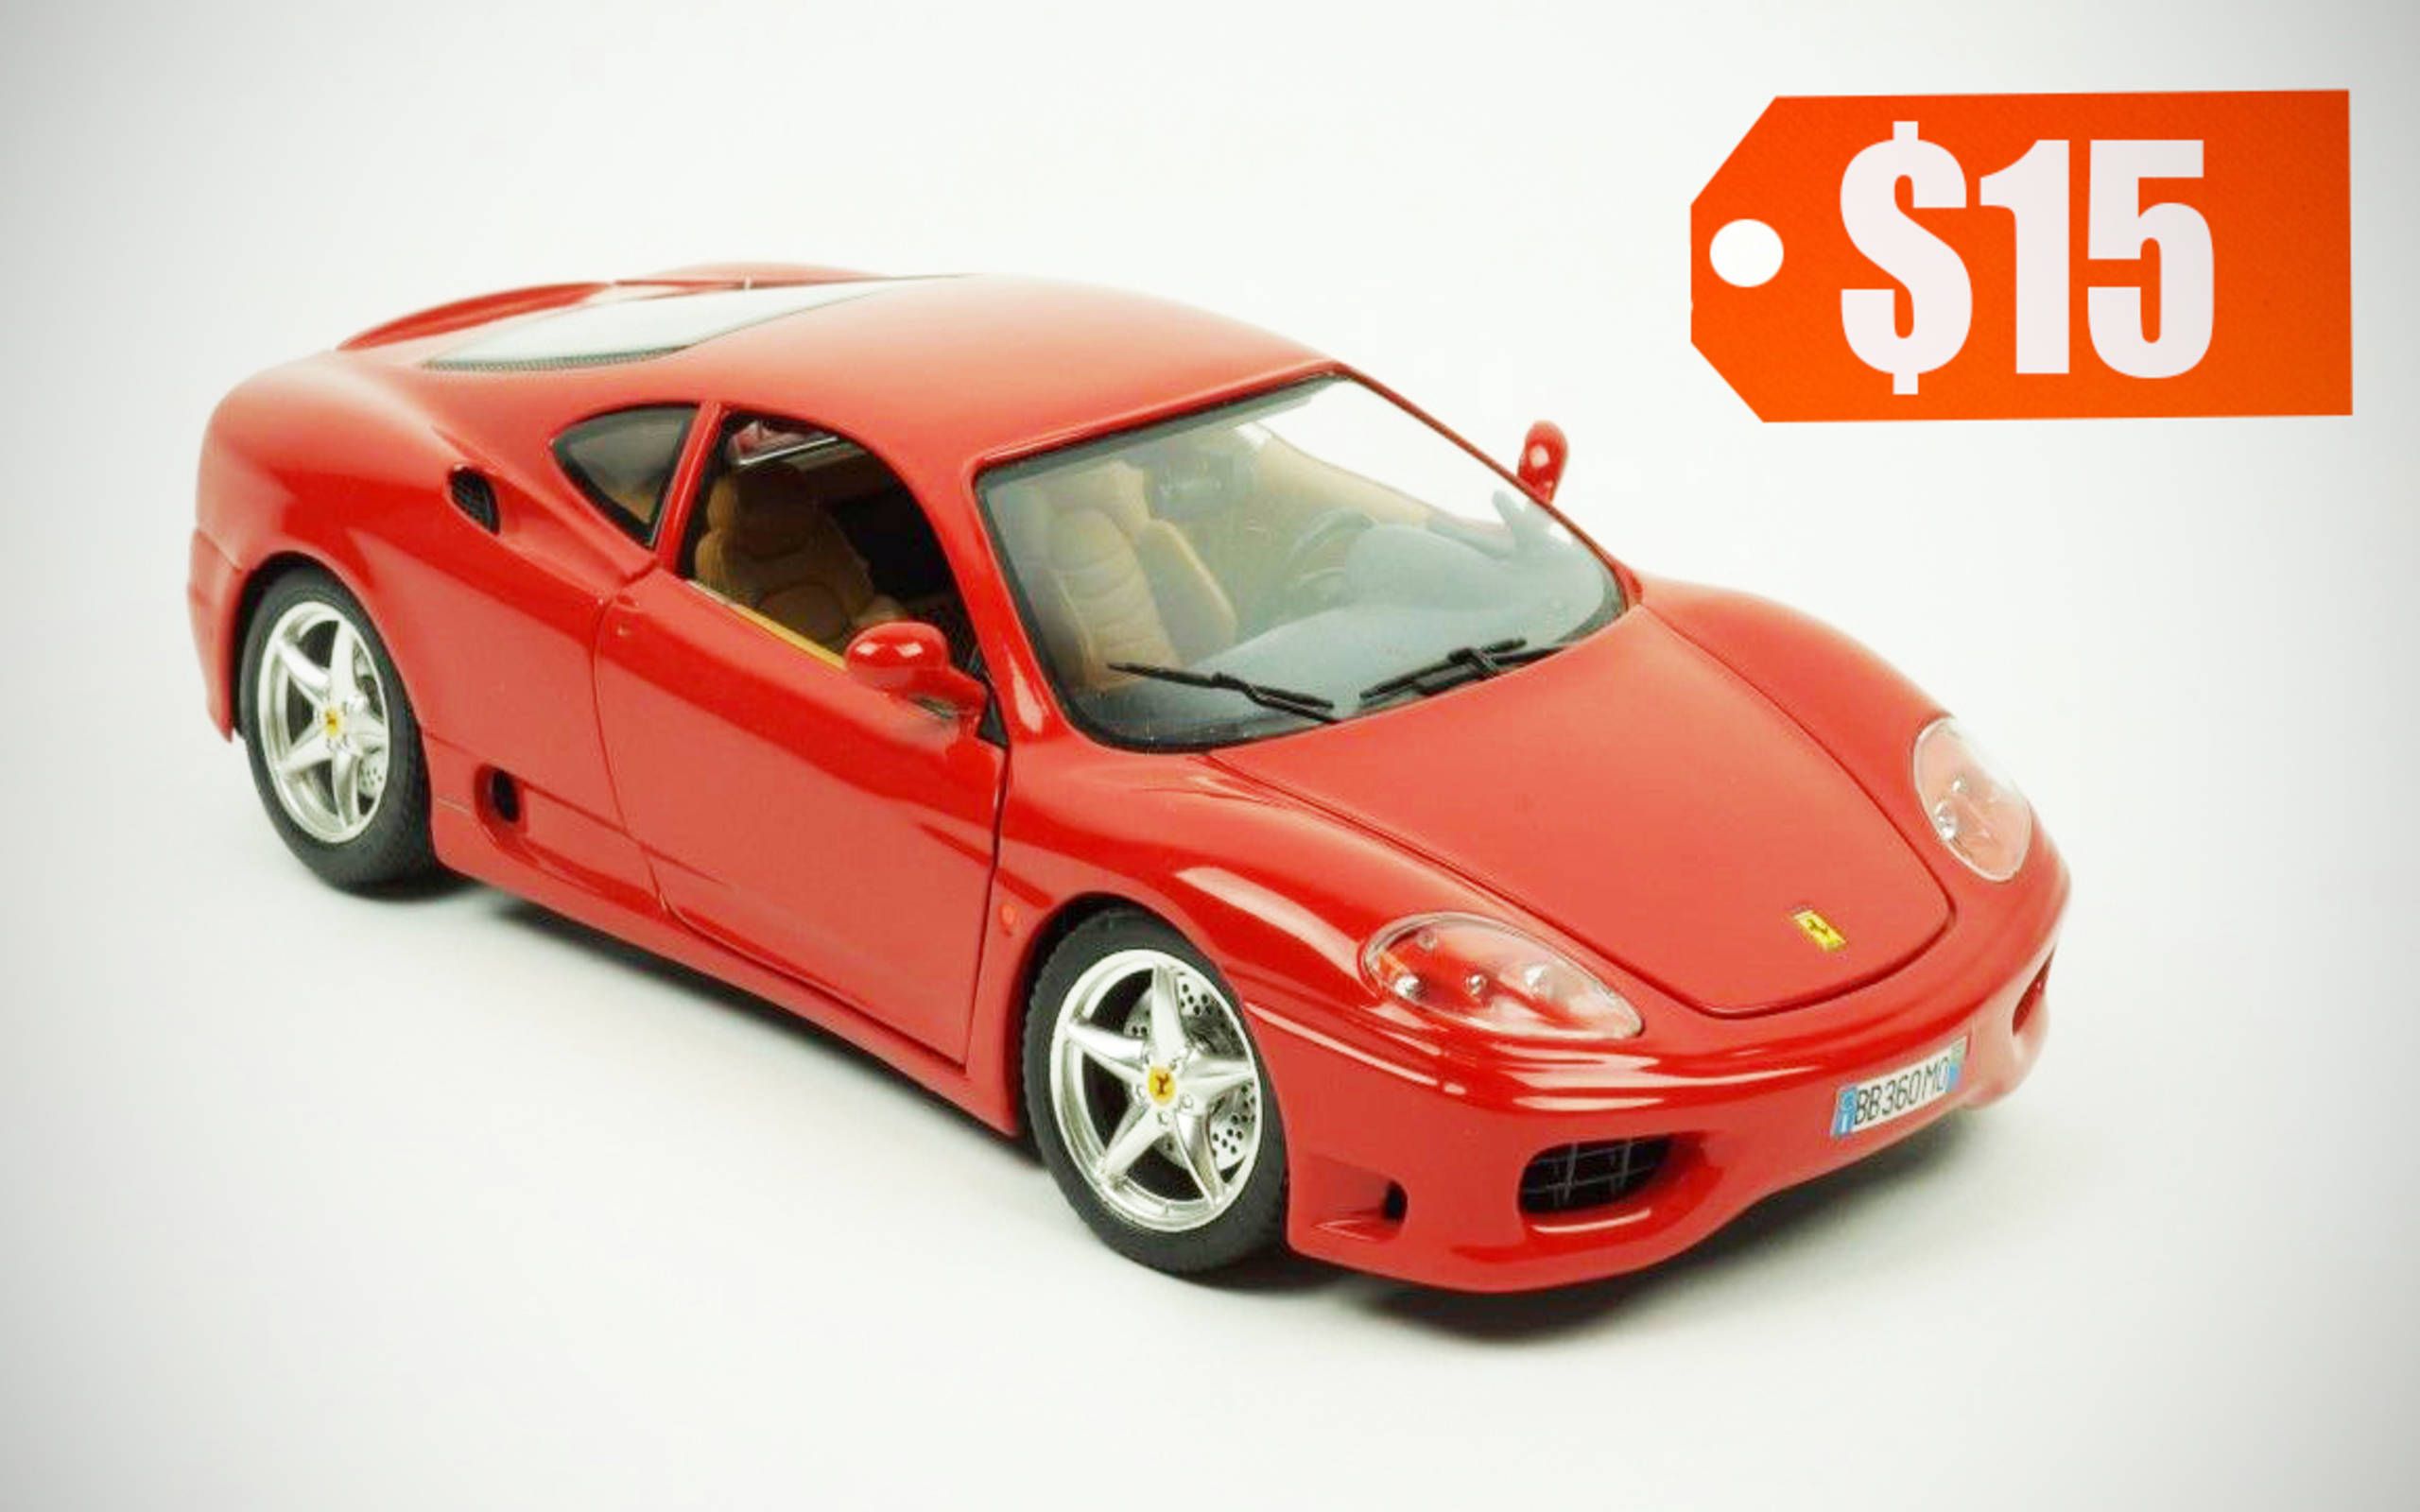 These are the best and cheapest 1:18 Ferraris you can buy